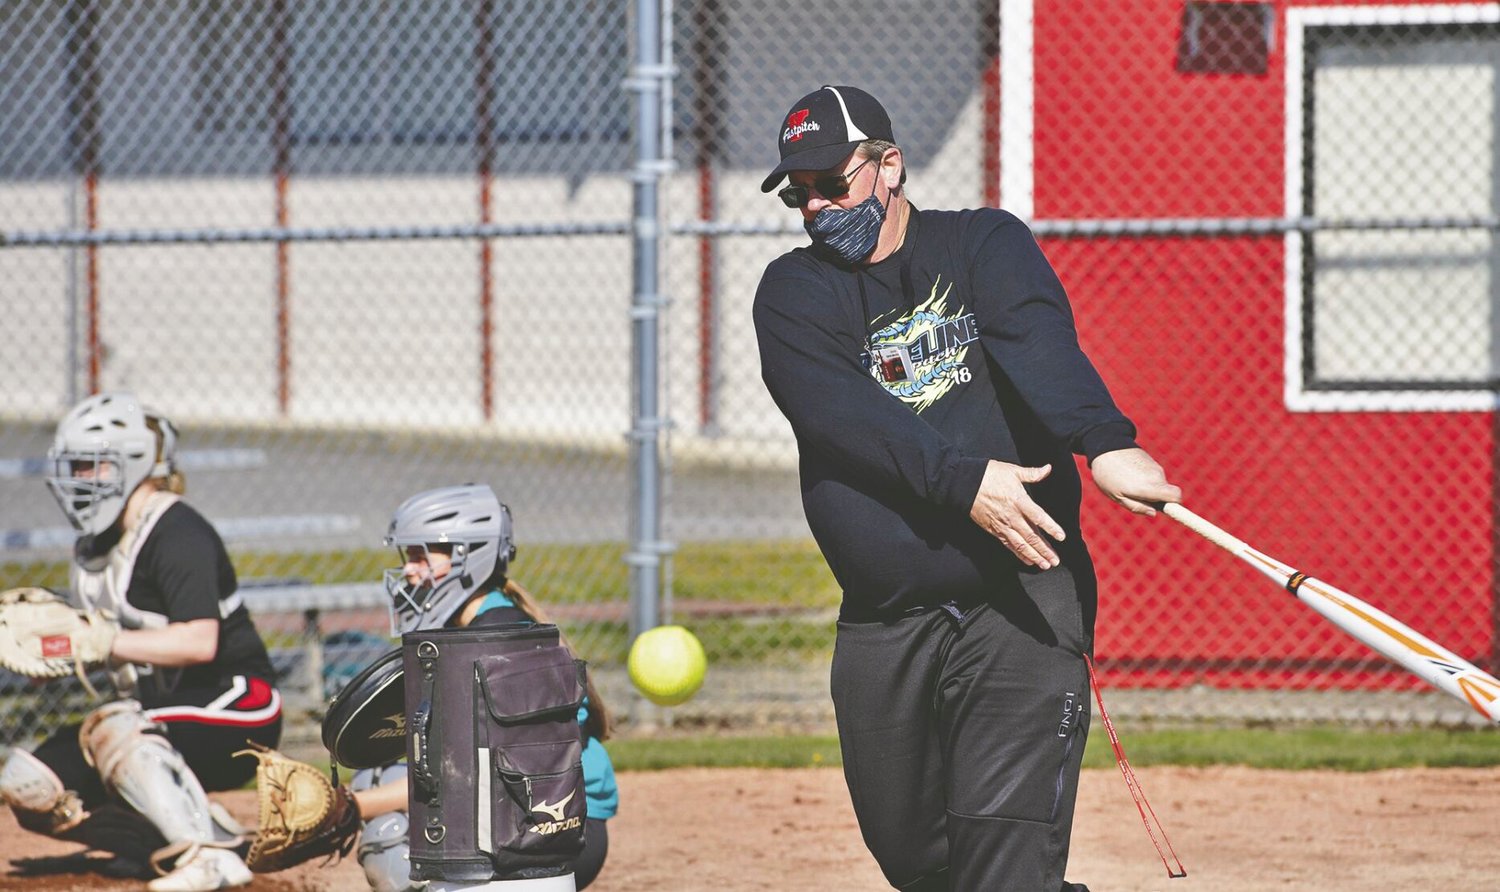 Russ Riches, Yelm High School softball junior varsity coach, hits ground balls to players during practice on Wednesday, March 17.